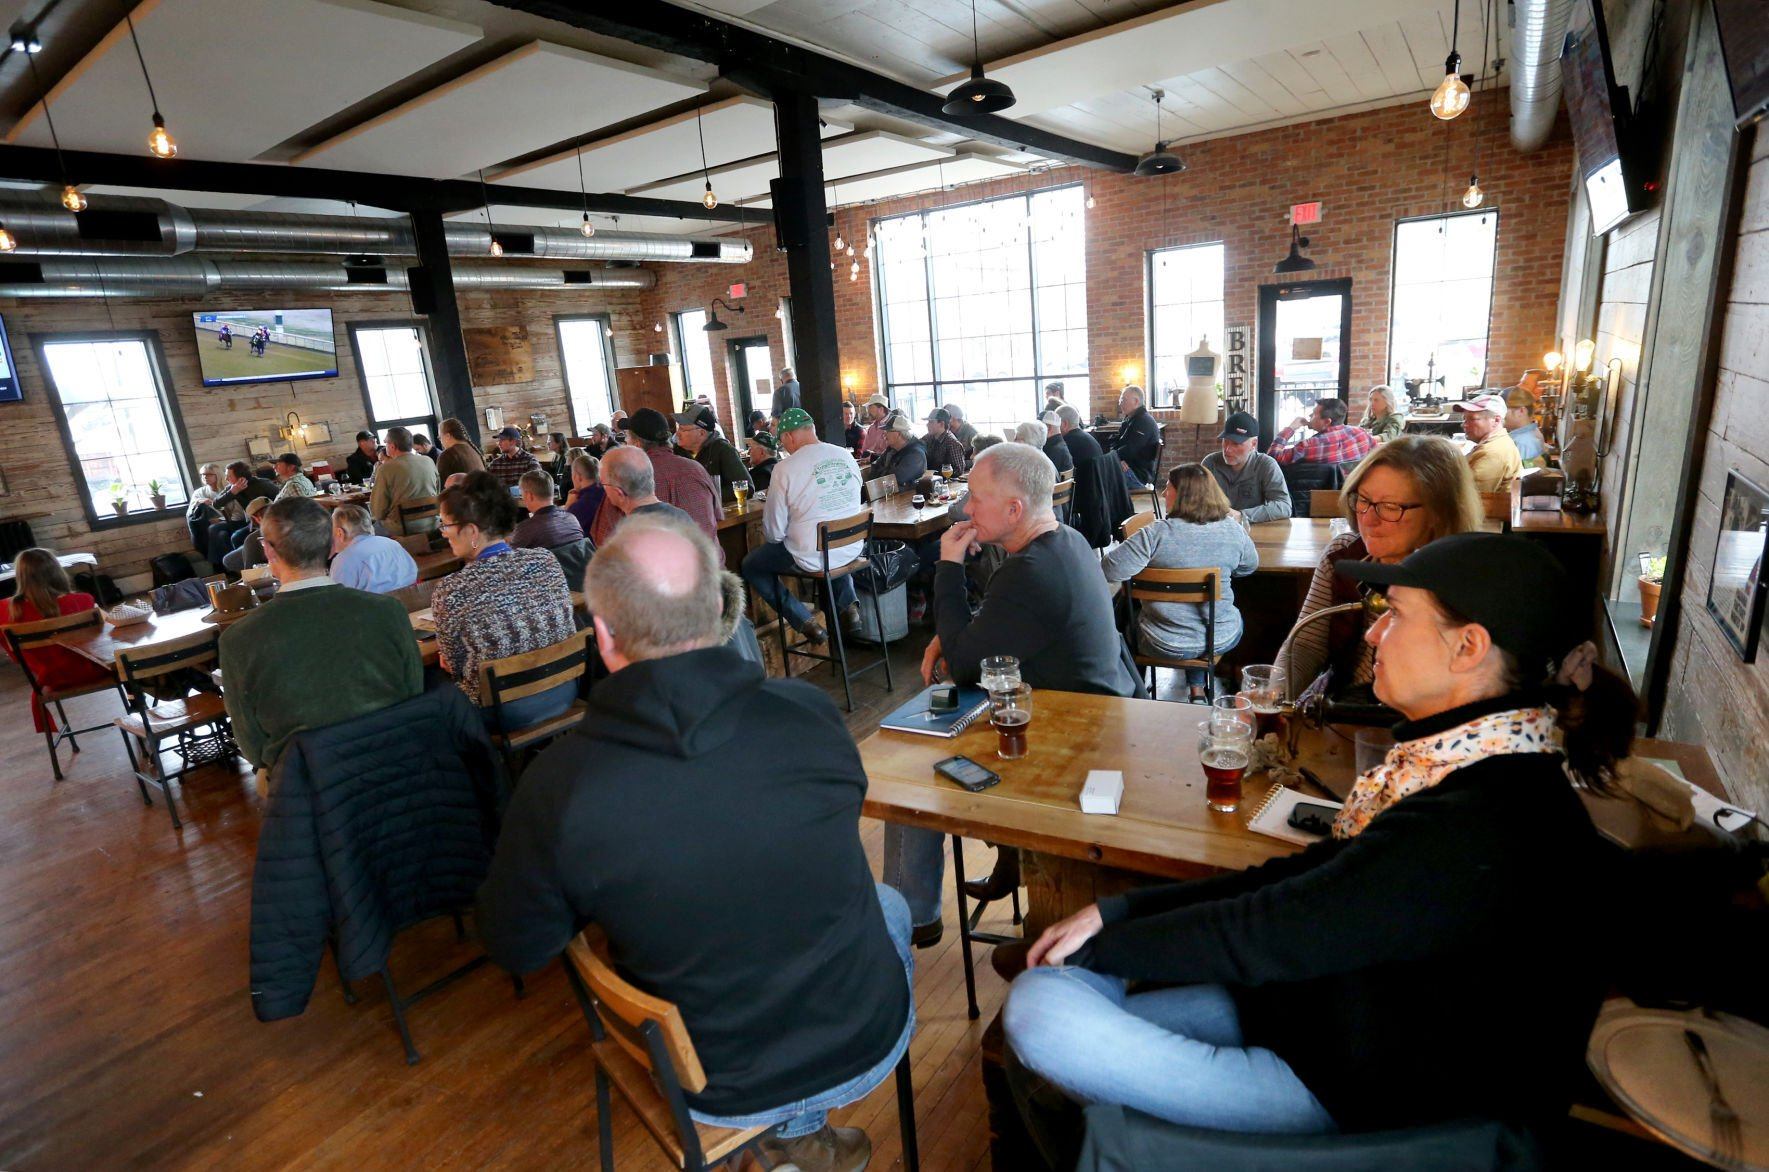 Attendees listen to presentations during a Farm to Brew event at Textile Brewing Co. in Dyersville, Iowa, on Wednesday, March 30, 2022.    PHOTO CREDIT: JESSICA REILLY